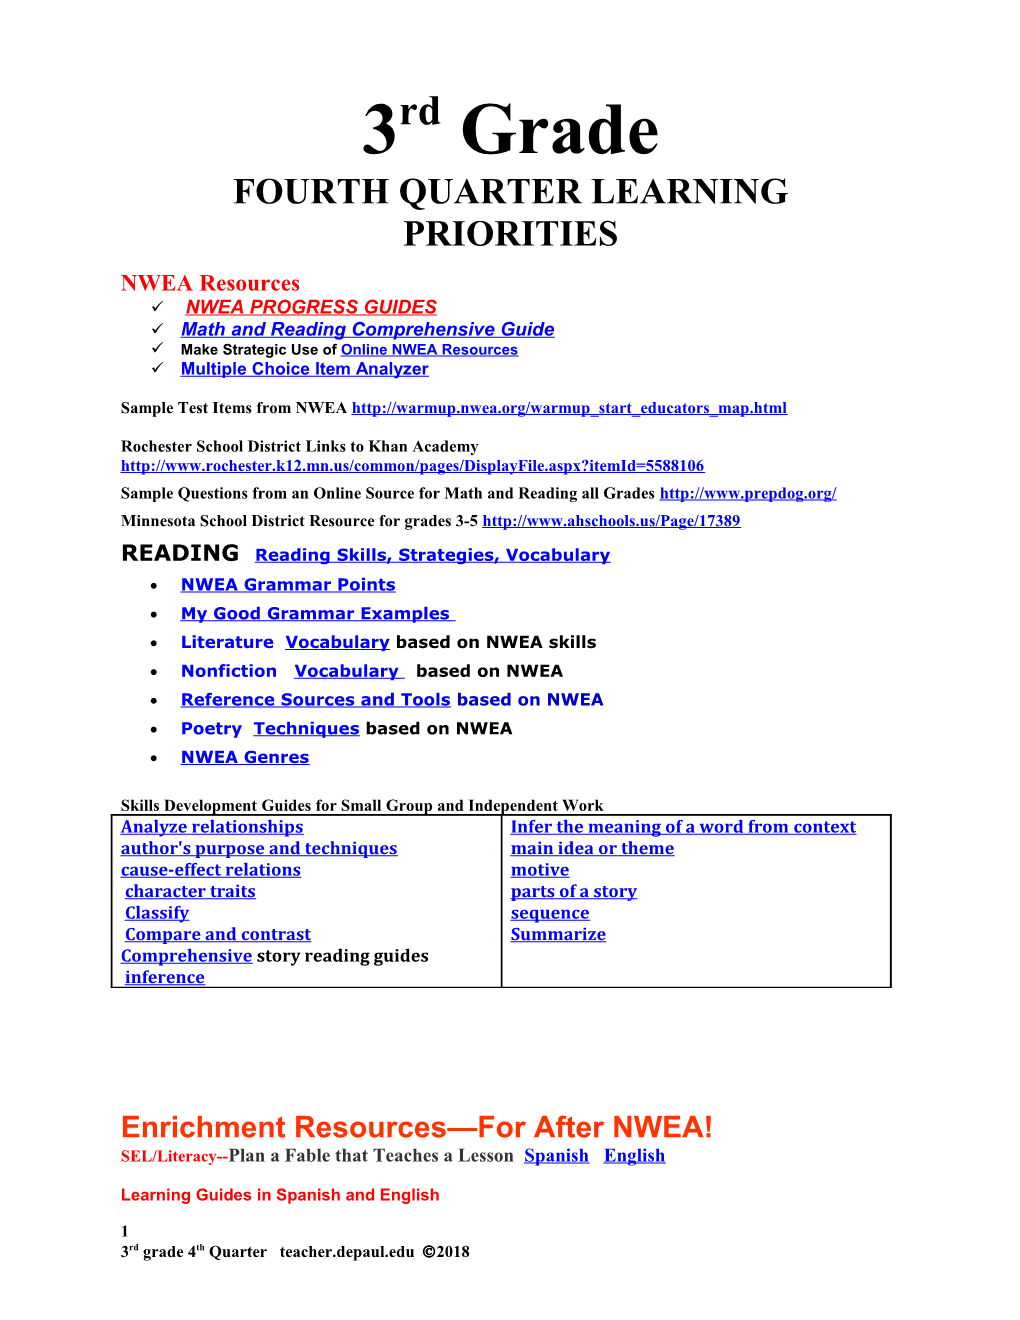 Fourth Quarter Learning Priorities